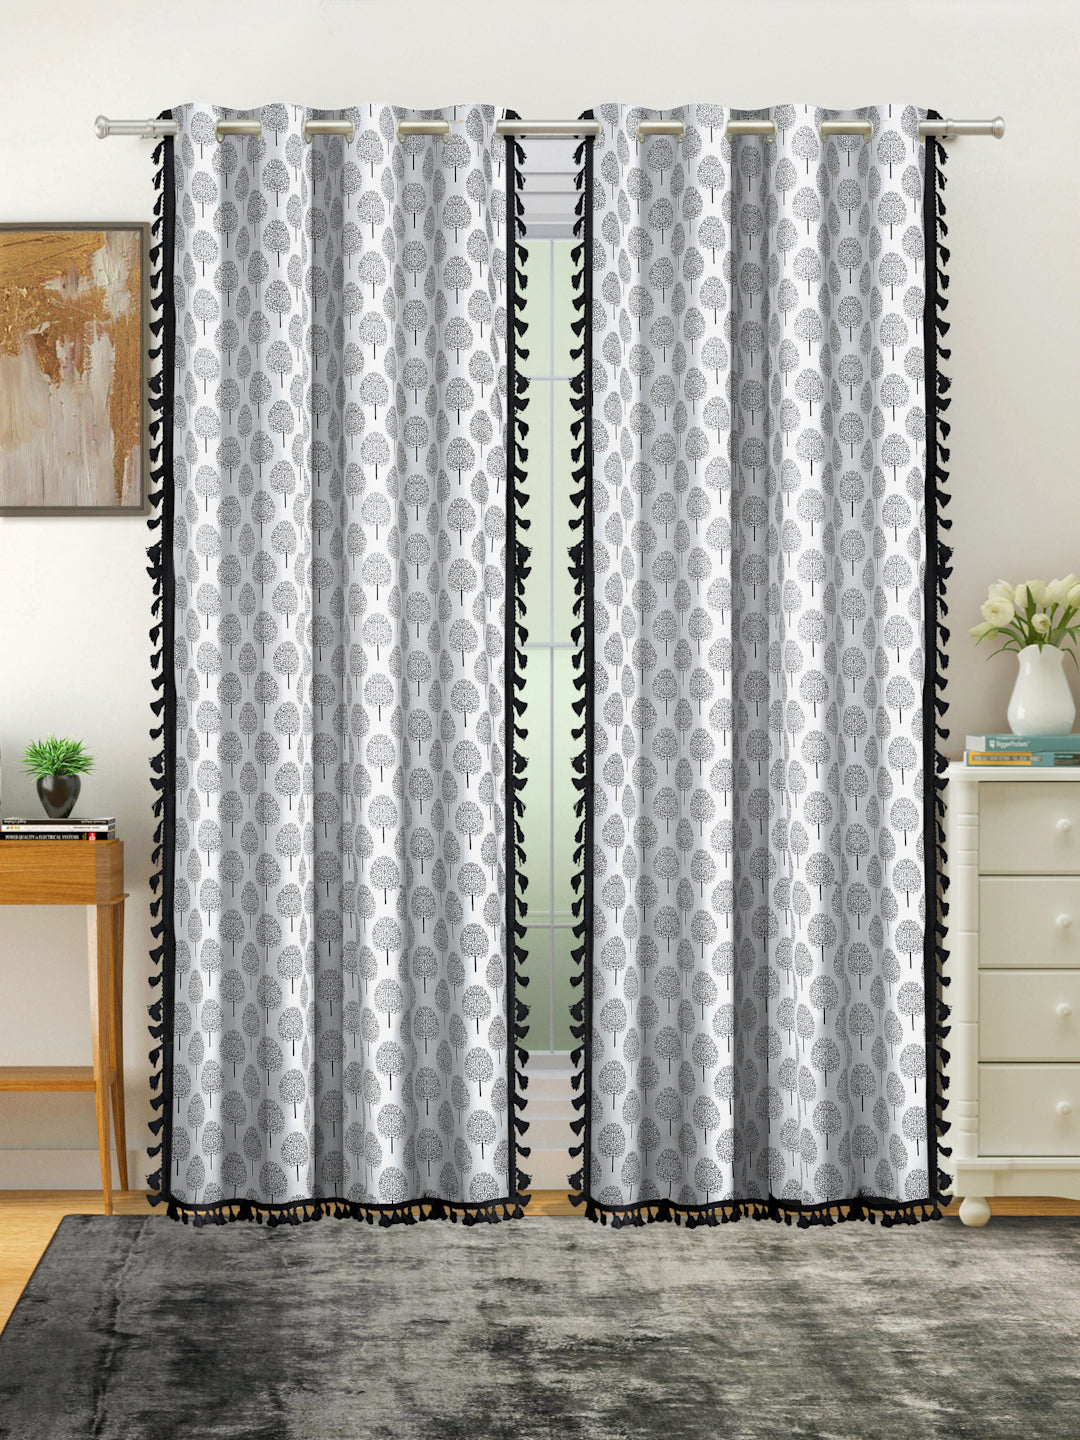 Cotton Printed Boho Light Filtering Door Curtain with Lace- Black and White (Pack of 2)